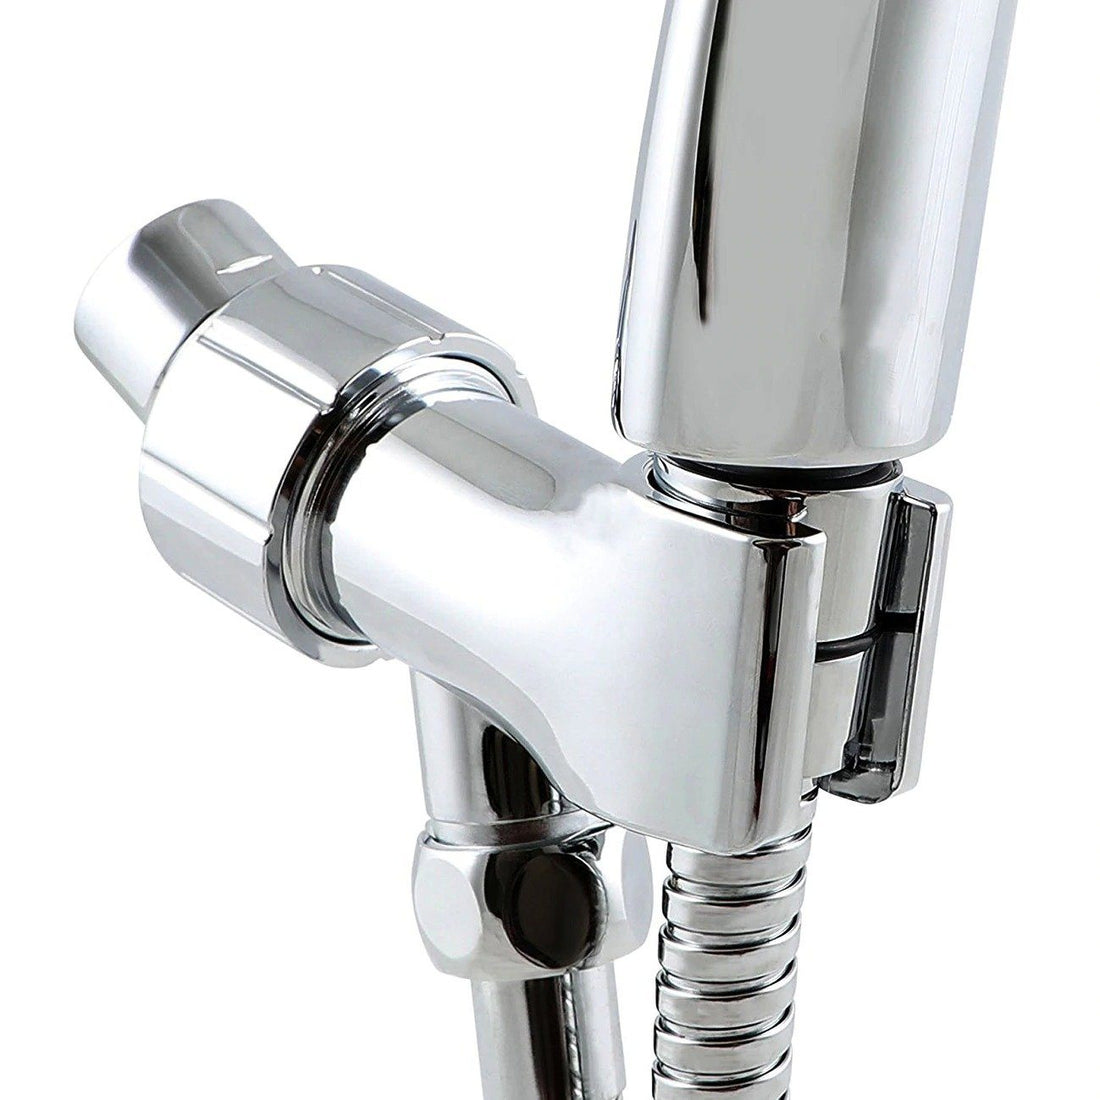 https://cdn.shopify.com/s/files/1/0523/6277/2641/products/shower-arm-mounted-shower-head-holder-ad_main-0.jpg?v=1624681975&width=1100